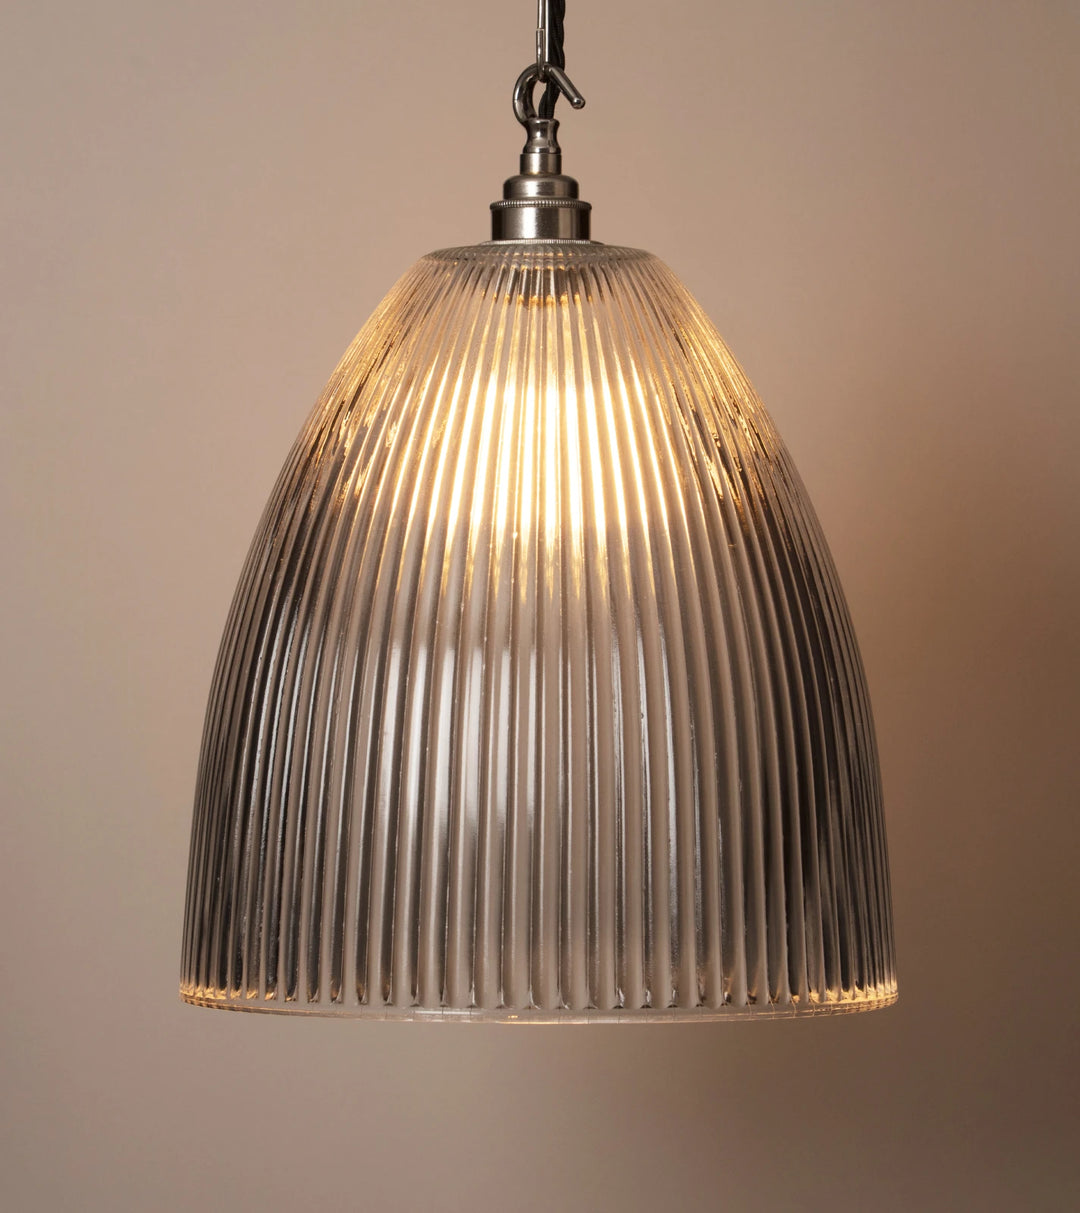 A pendant light with a grey glass shade.